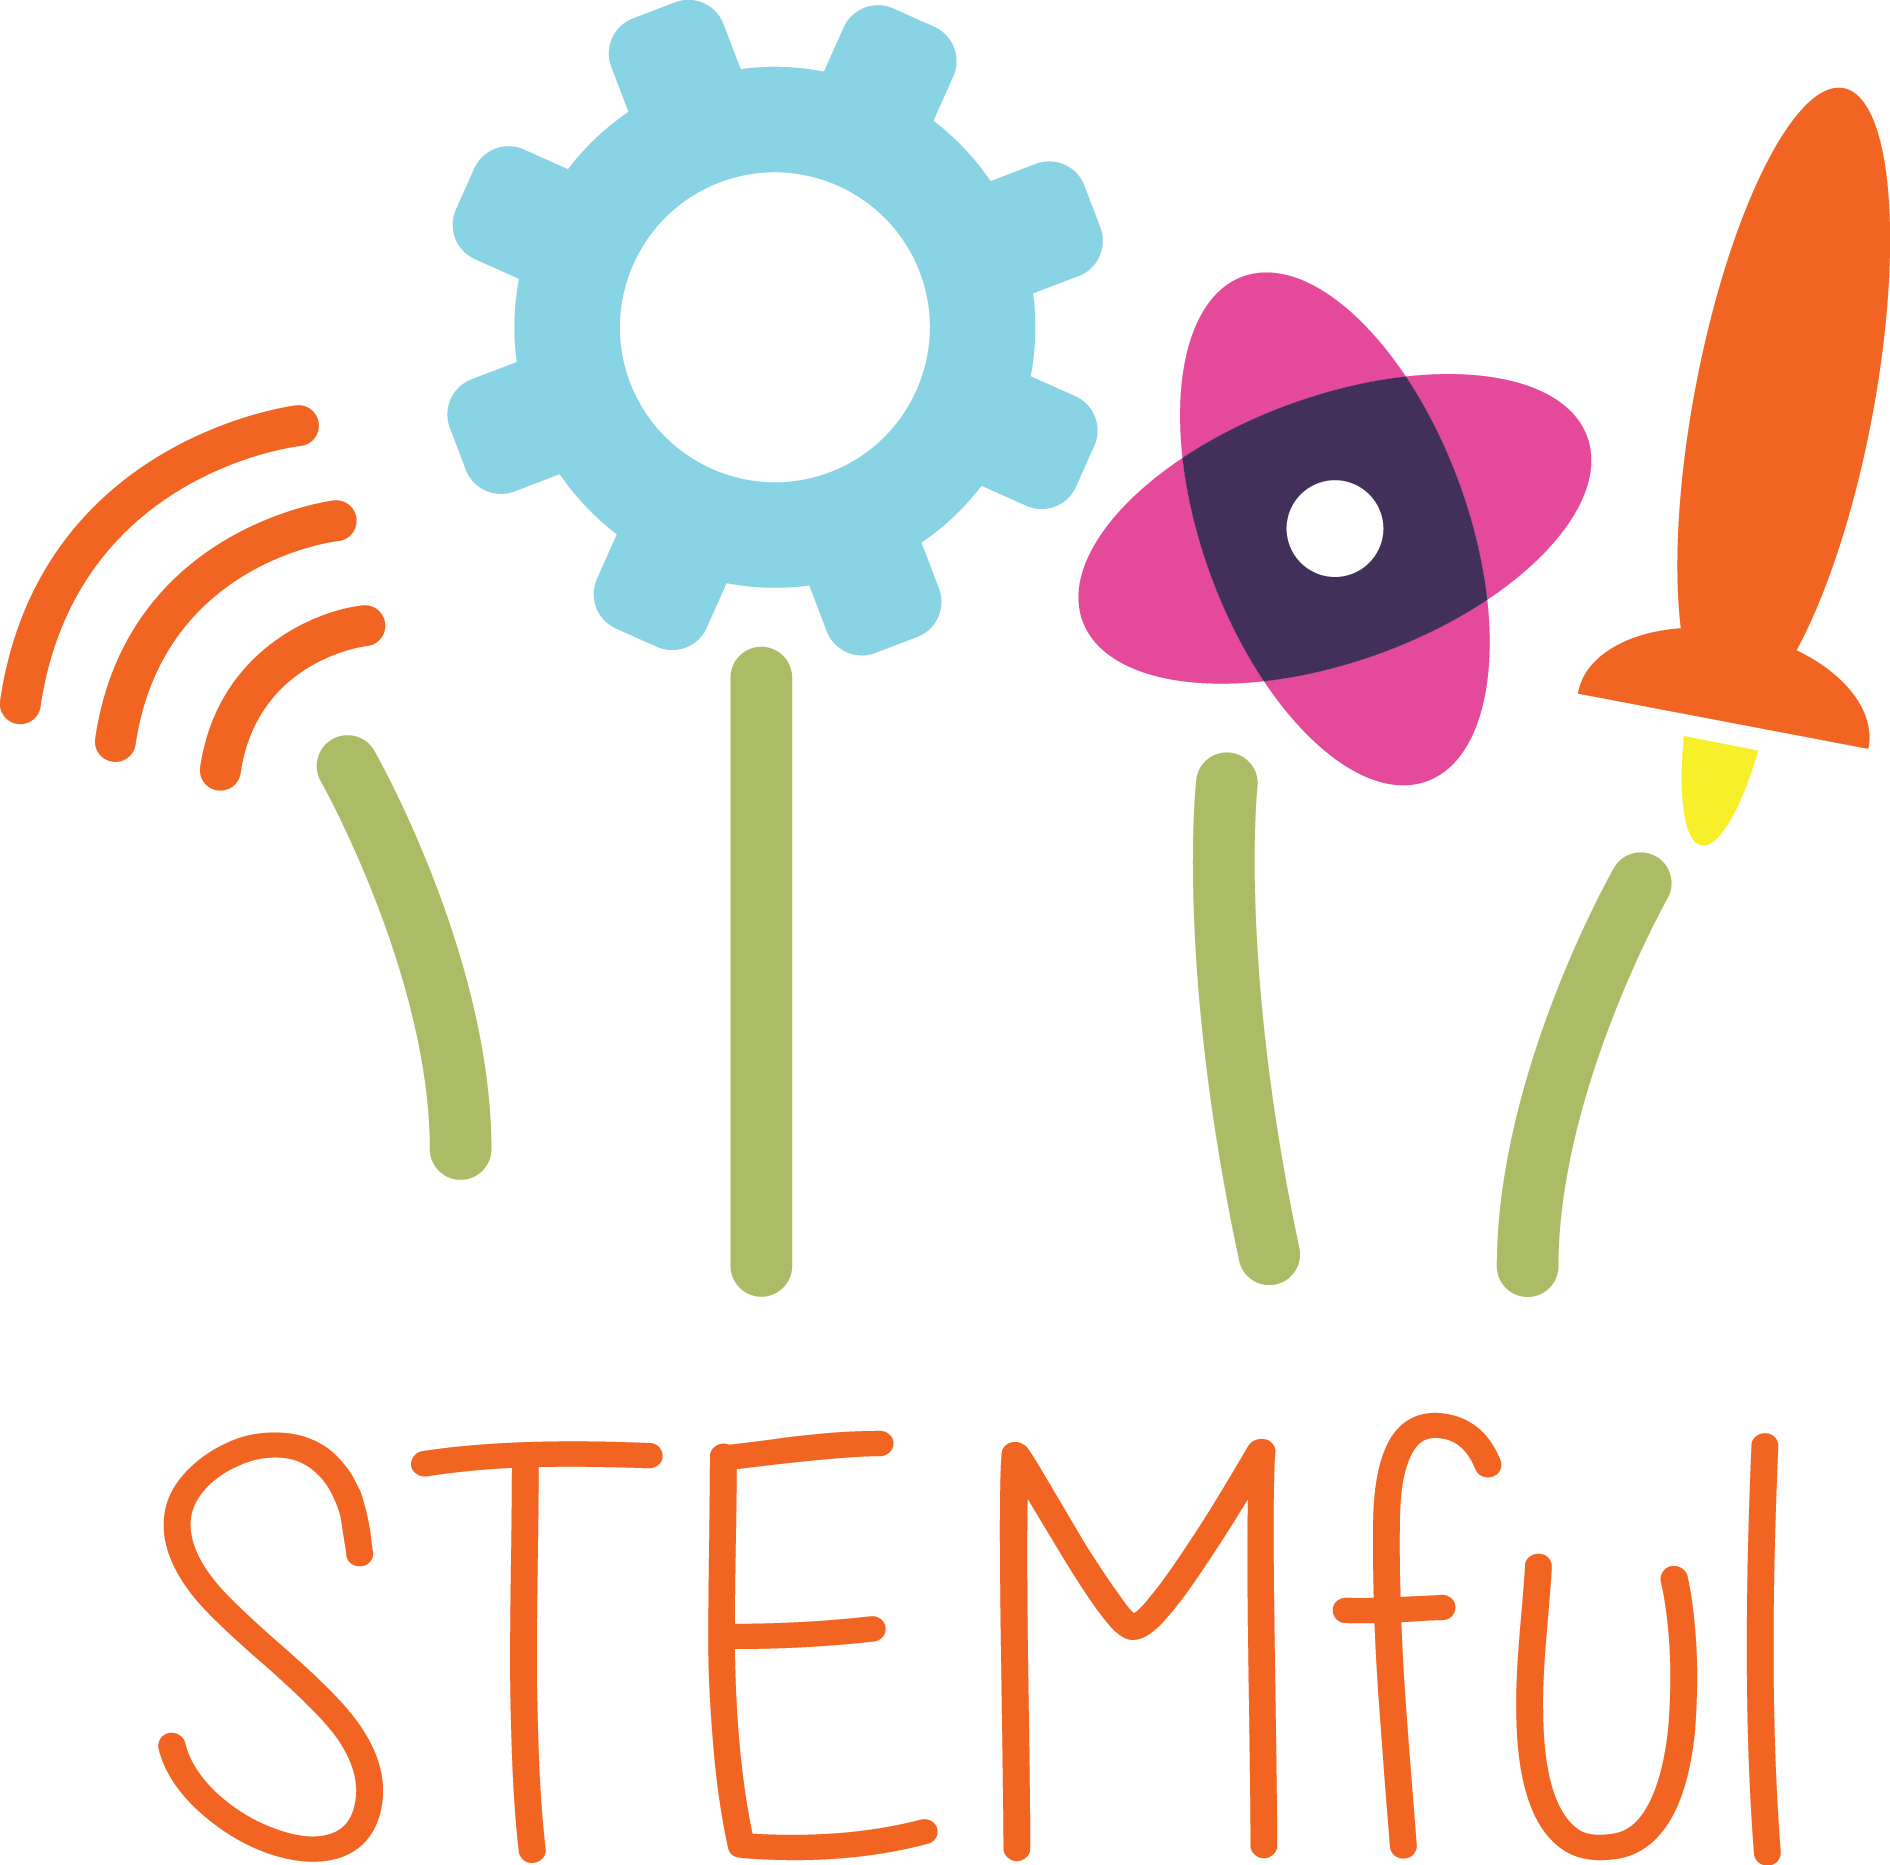 Stemful San Francisco Is A New Stem Community Center - Supply Chain Icon Png (1890x1865)